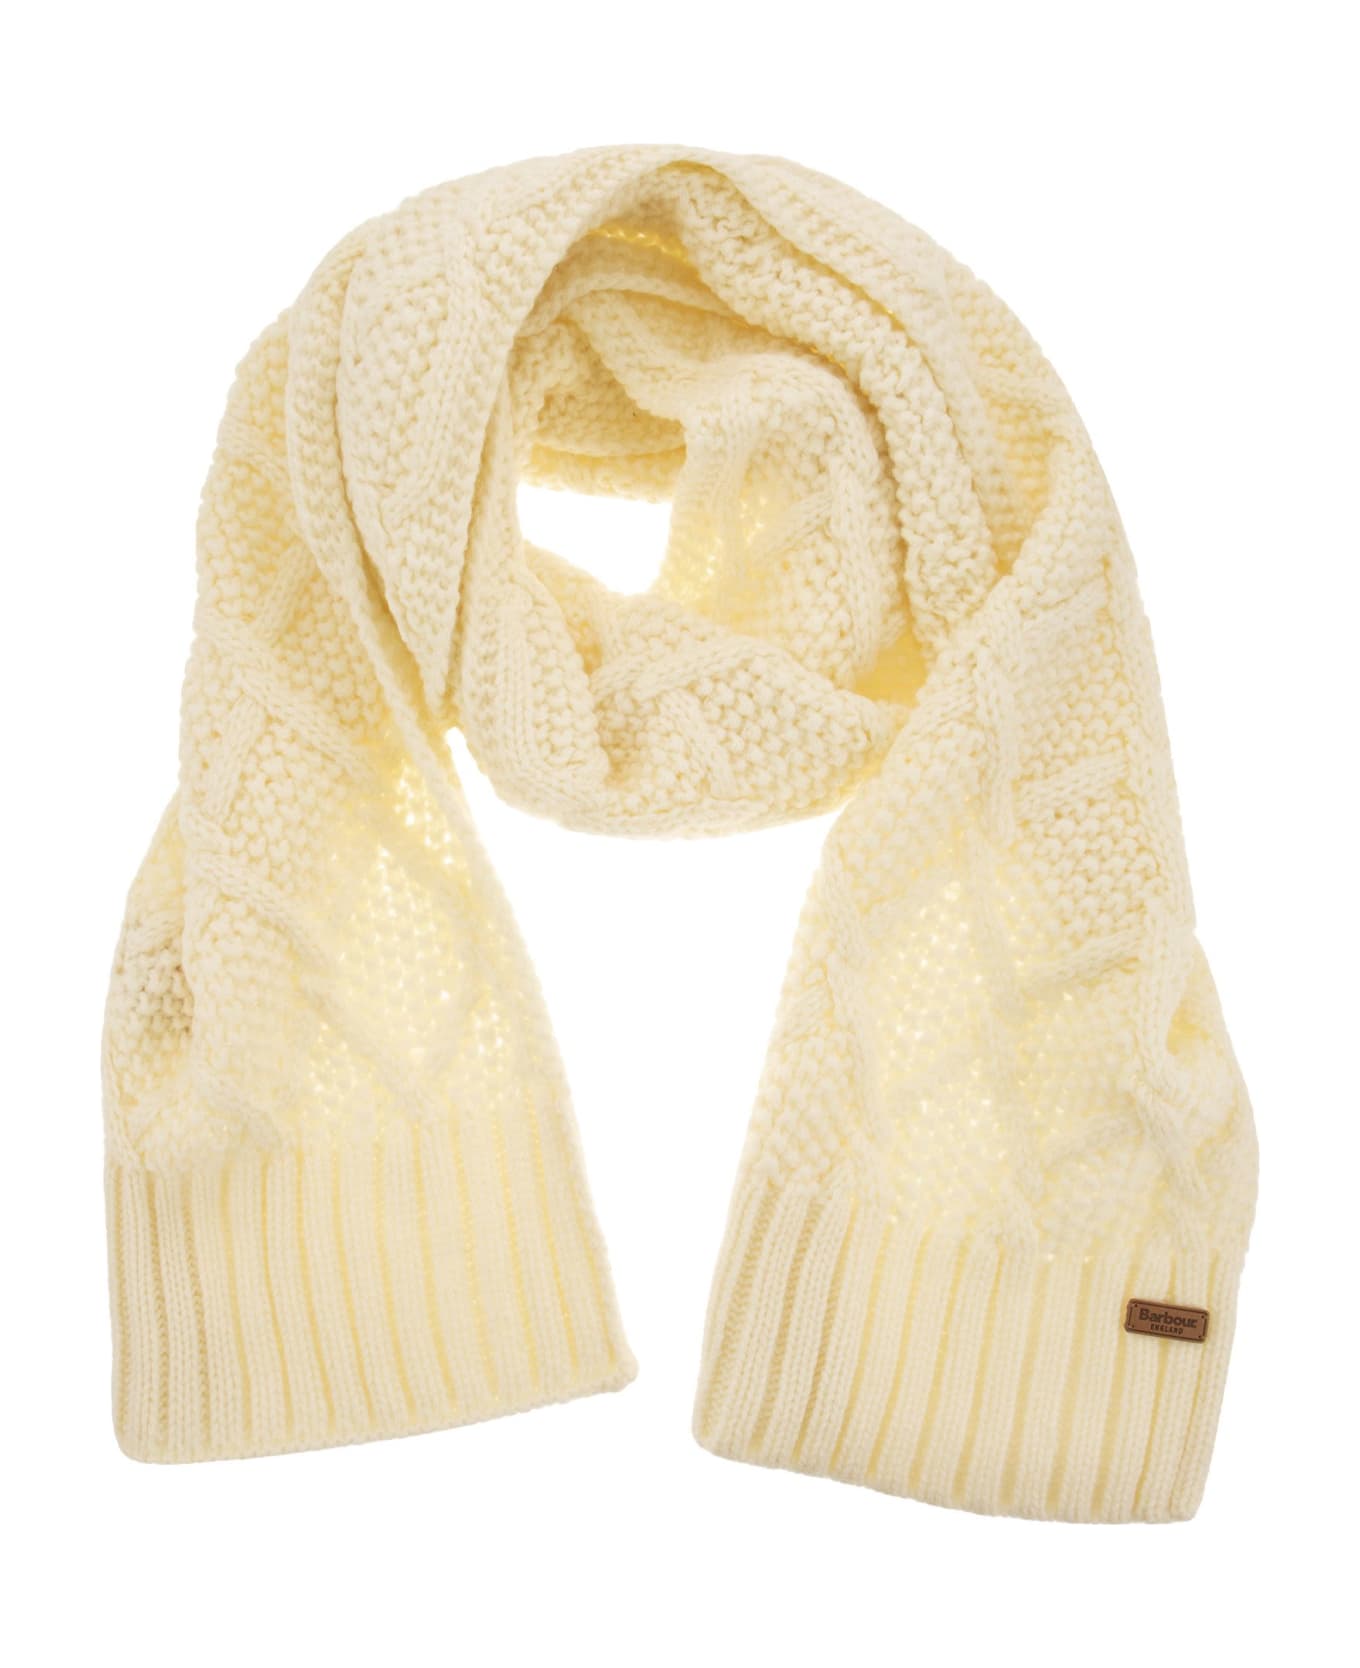 Barbour Ridley Cap And Scarf Set - Cream